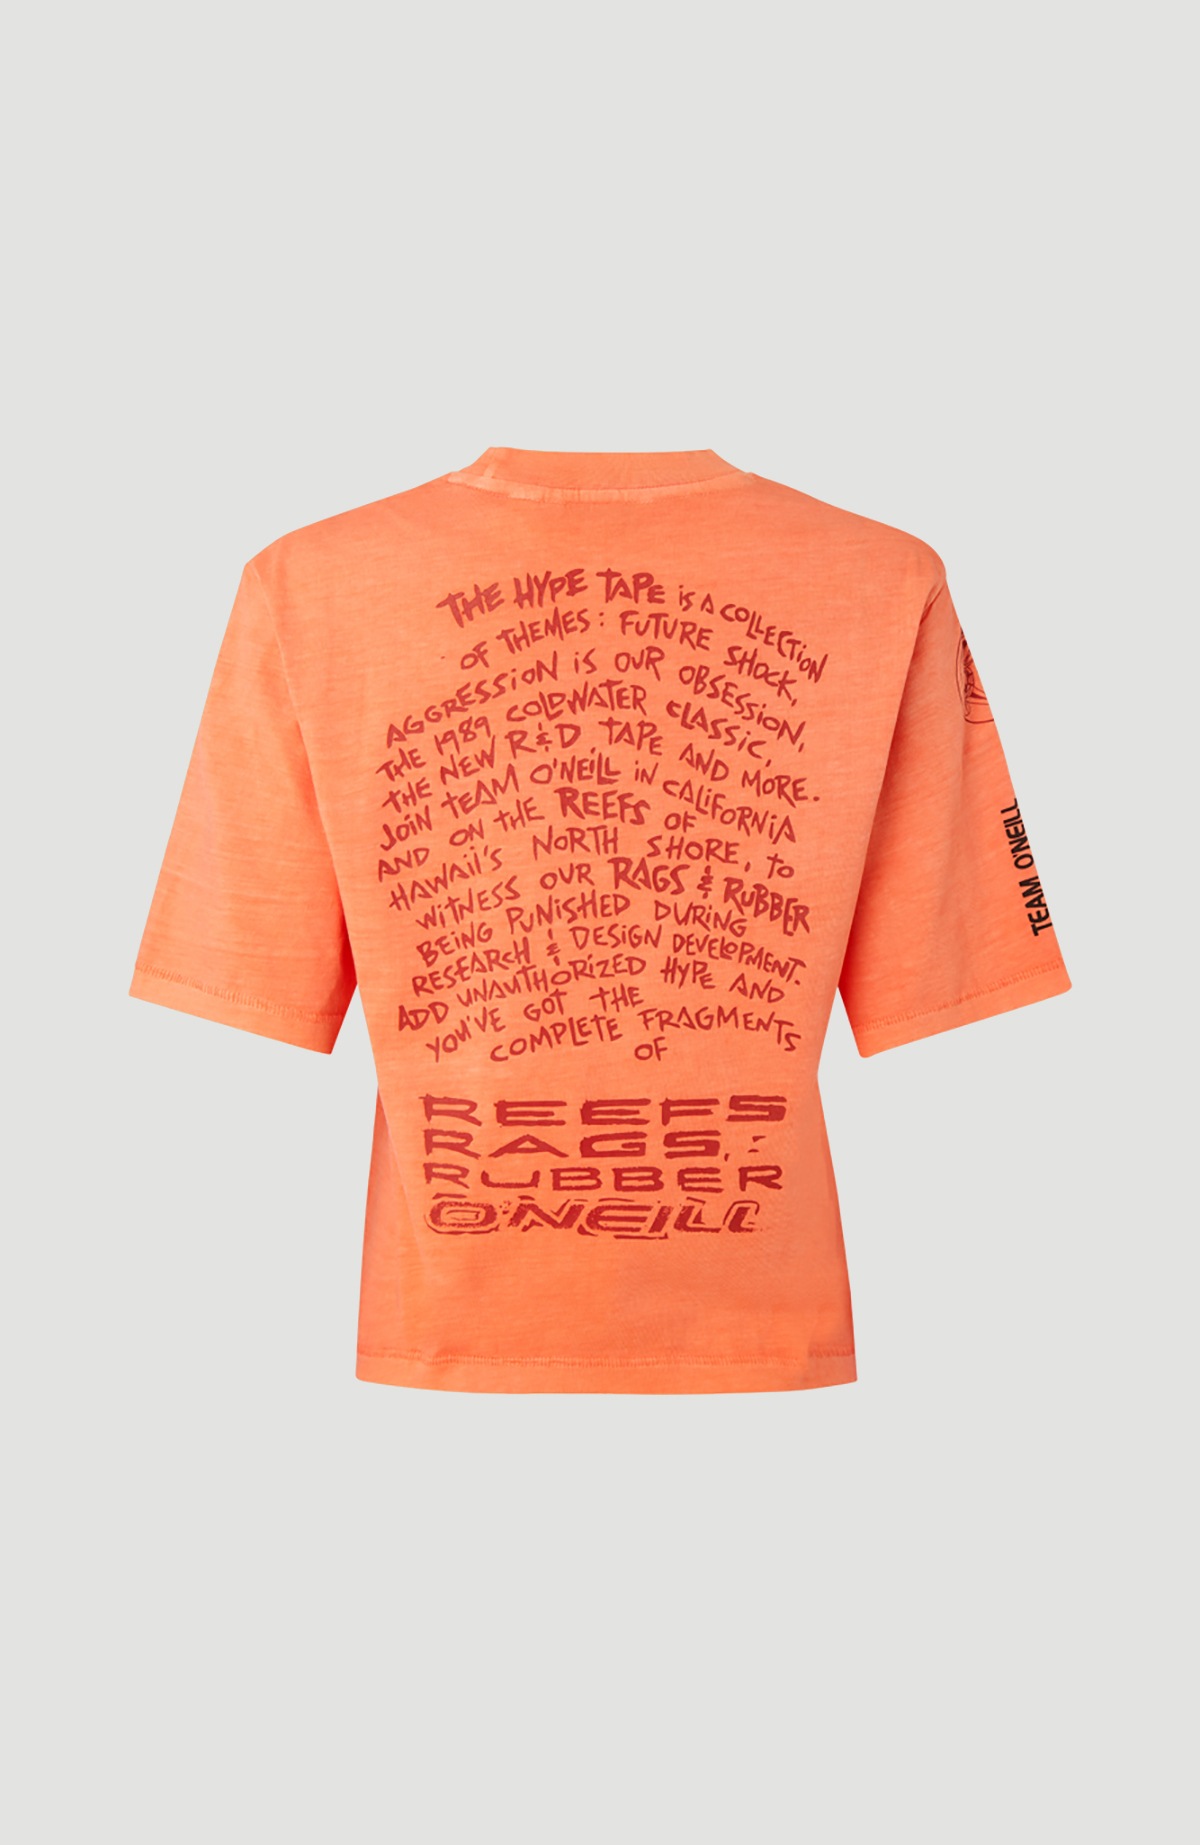 O'Neill T-Shirt »Re-issue«